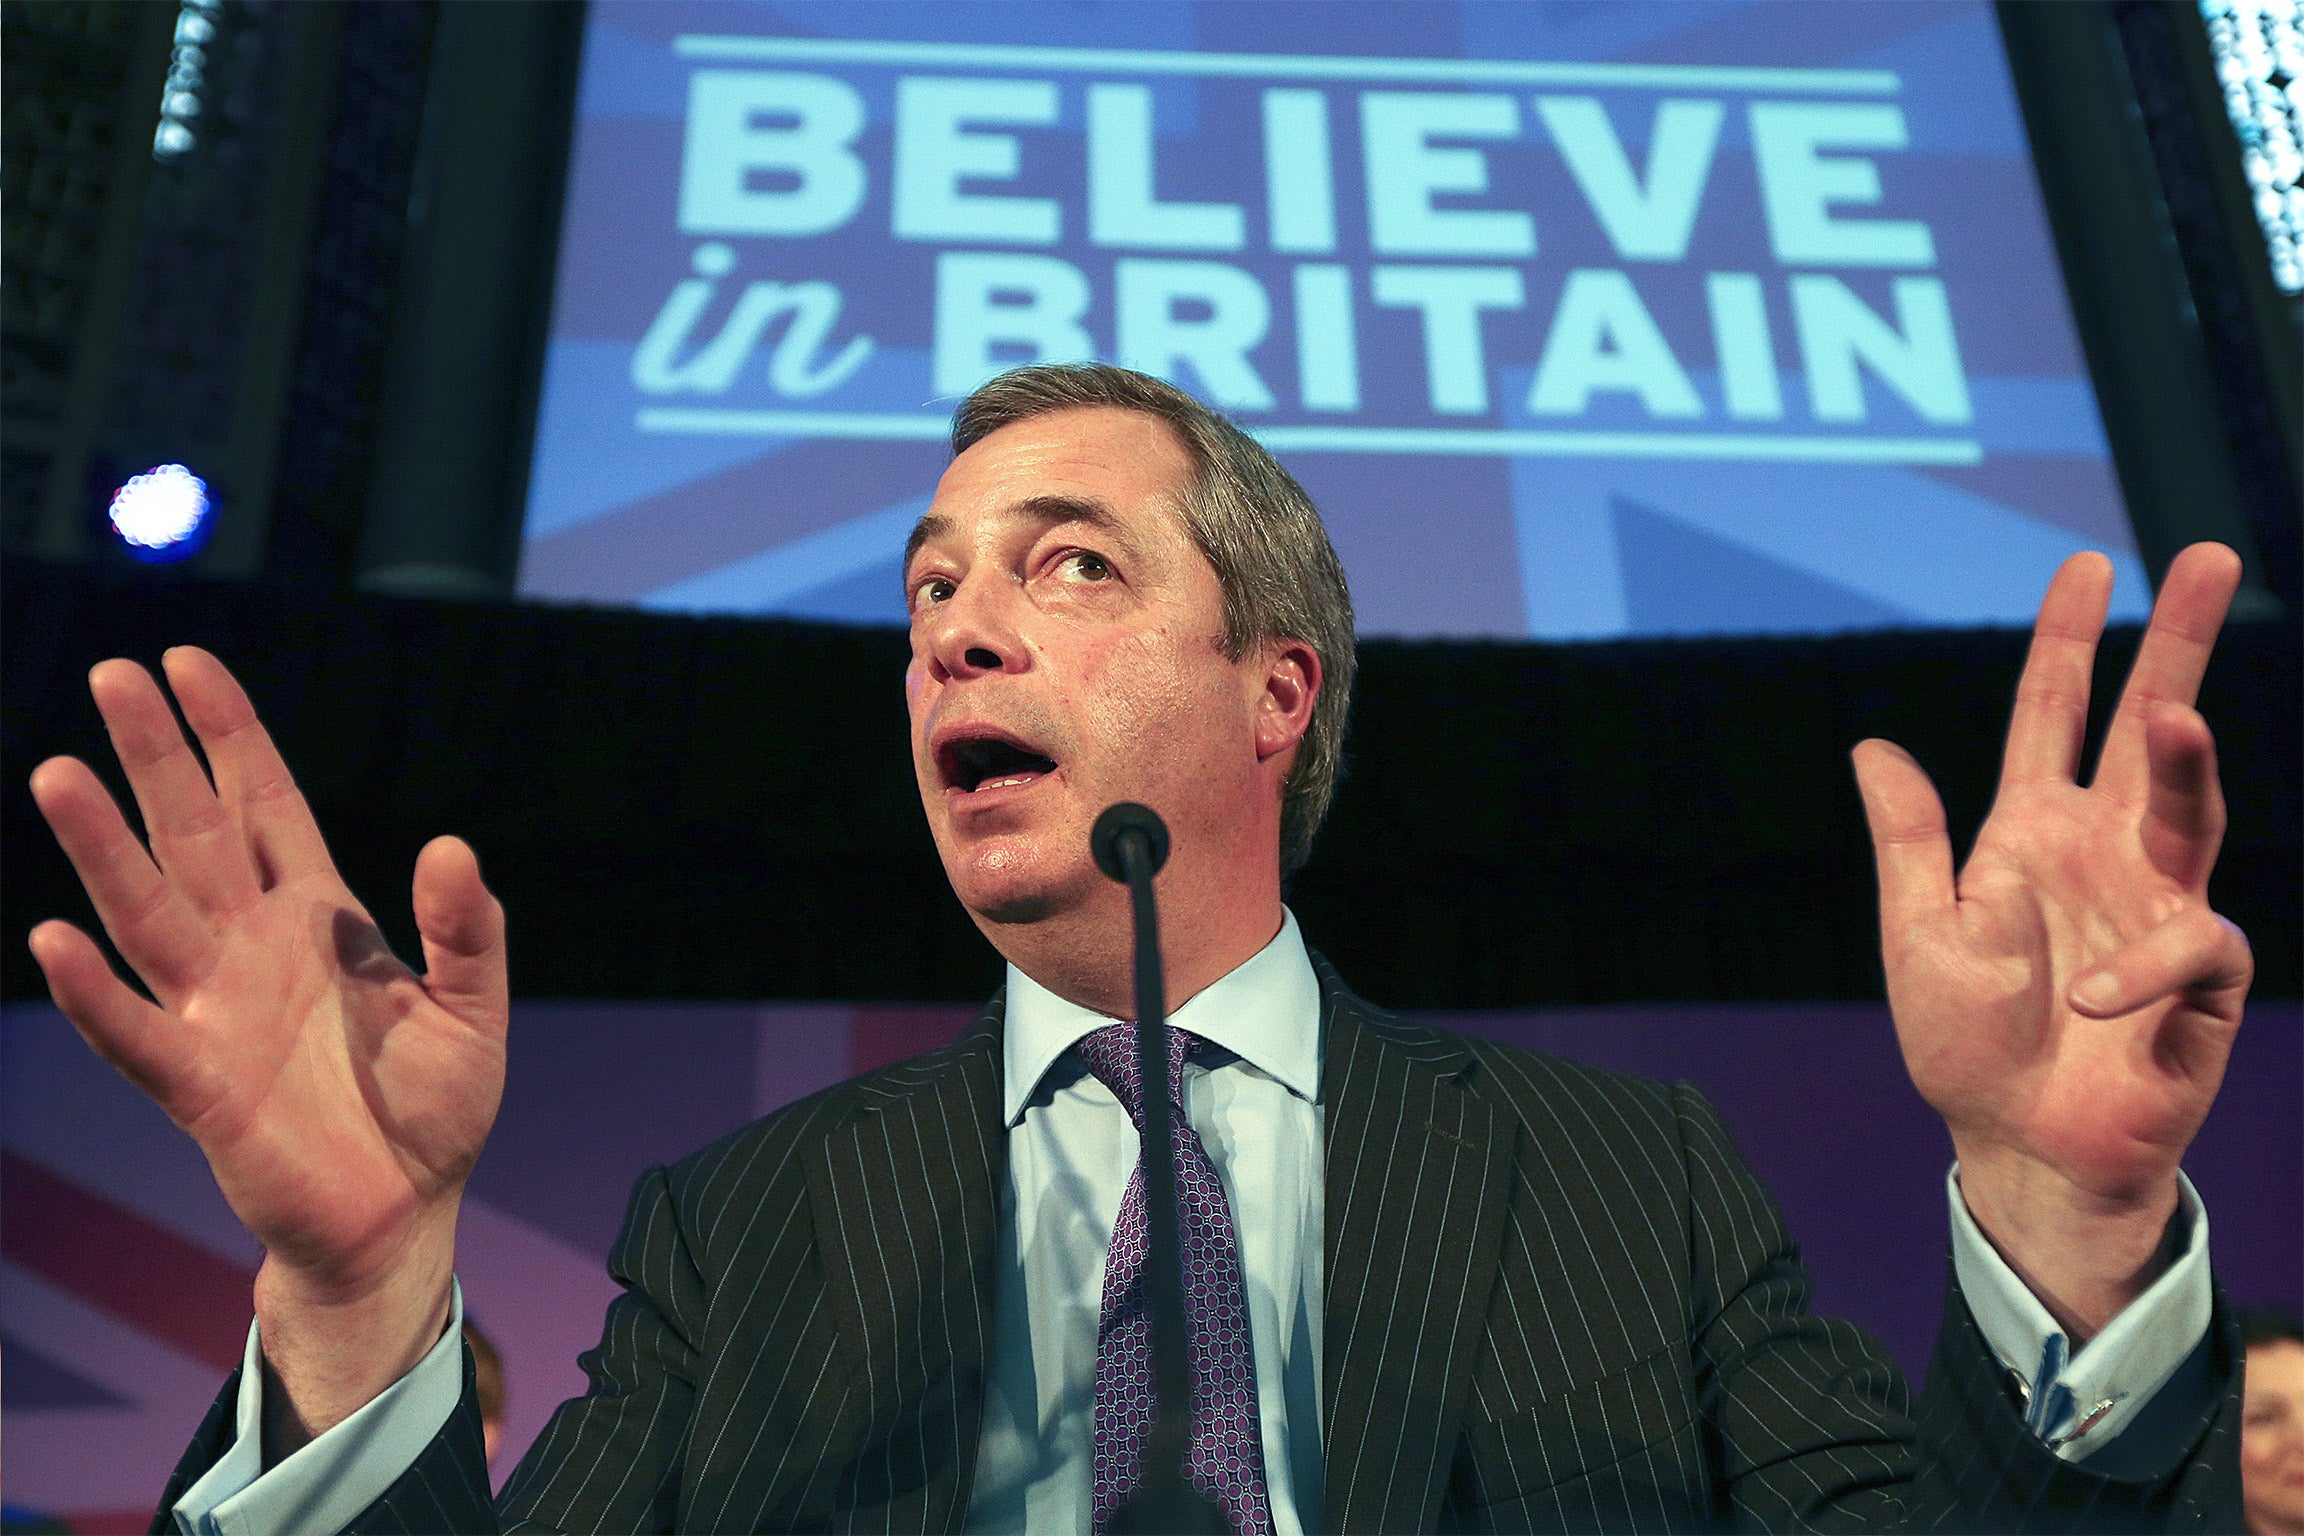 Ukip and Nigel Farage has set out an economic platform underpinned by £25bn of savings from spending on the European Union, overseas aid, Scotland and the HS2 rail link